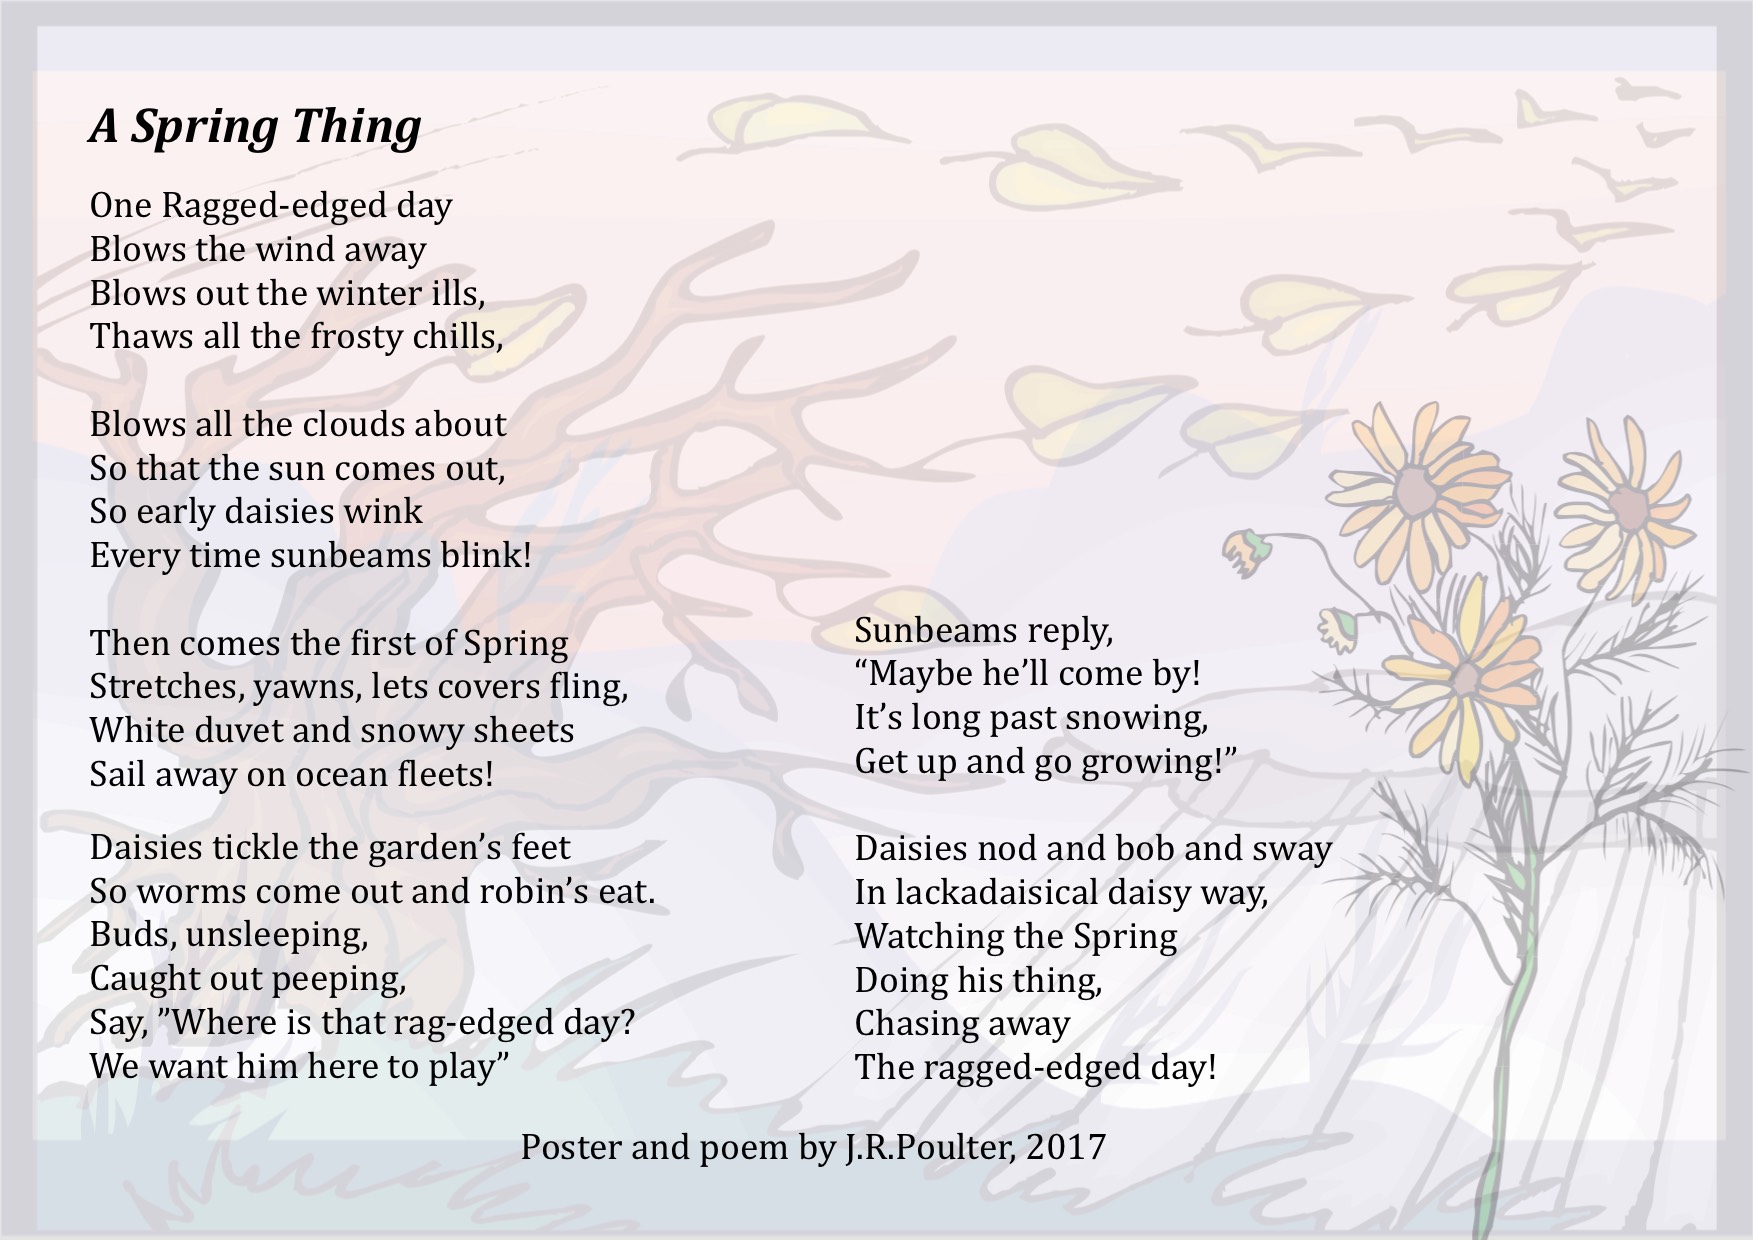 Winded away. Poems about Spring. Spring стихи на английском. Poem about Spring для 4 класса. Spring is here poem.